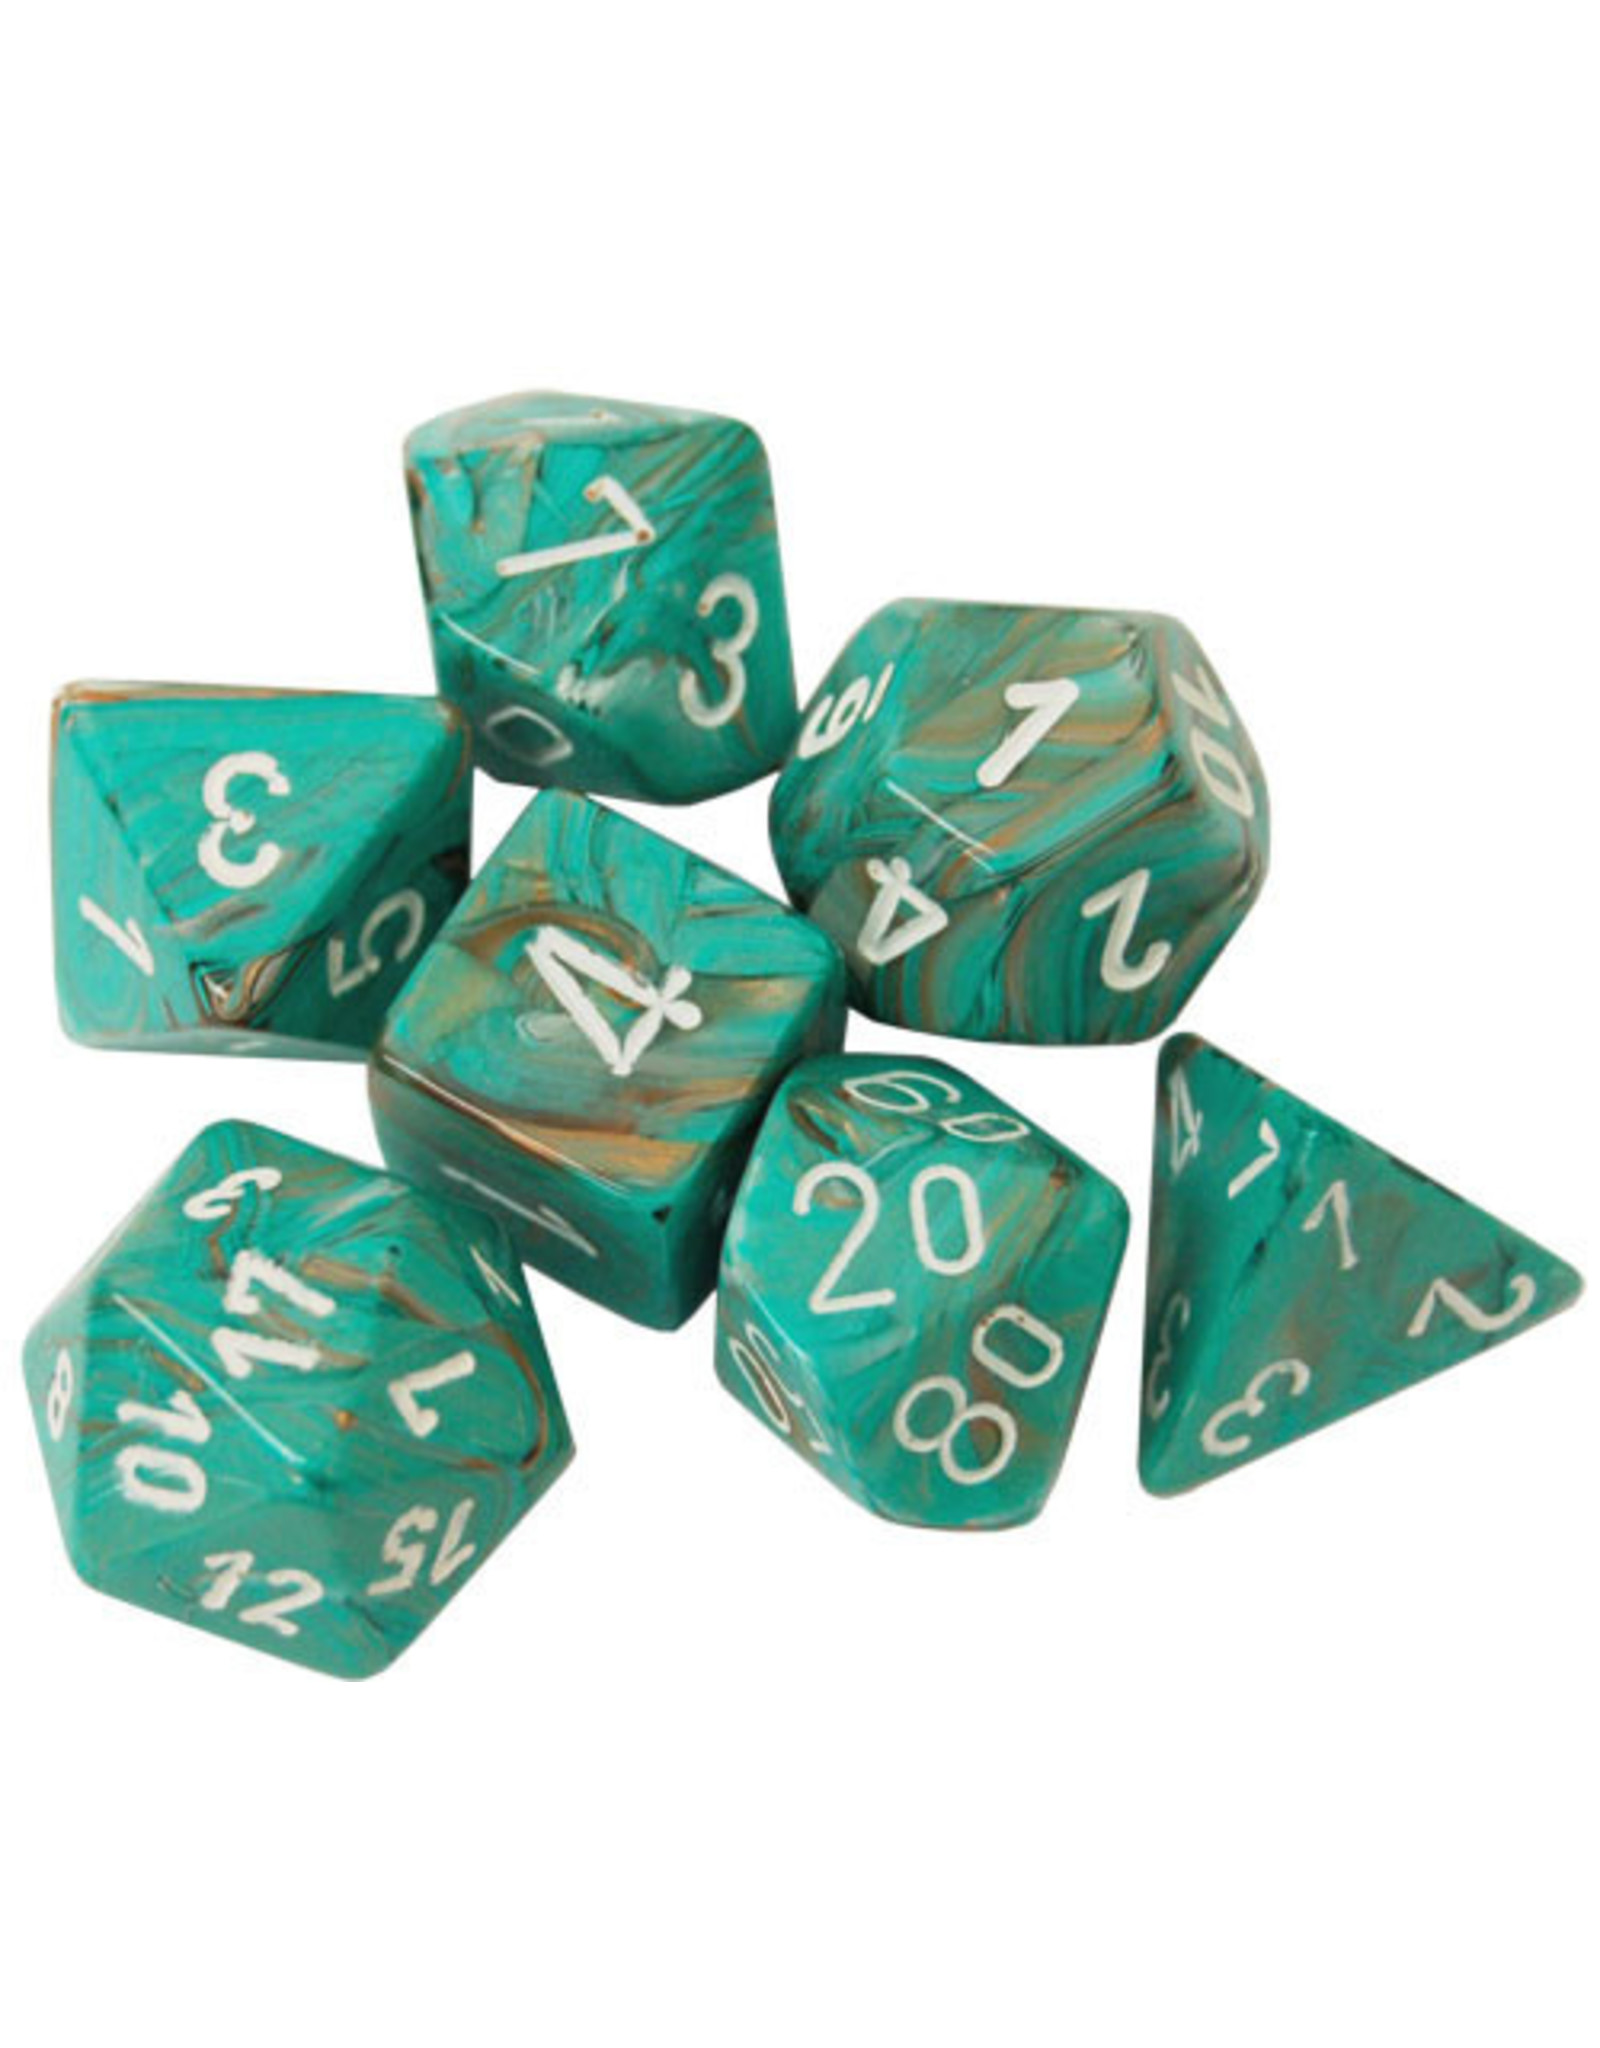 Chessex 7-Set Polyhedral Cube MBL Oxi-CPwh